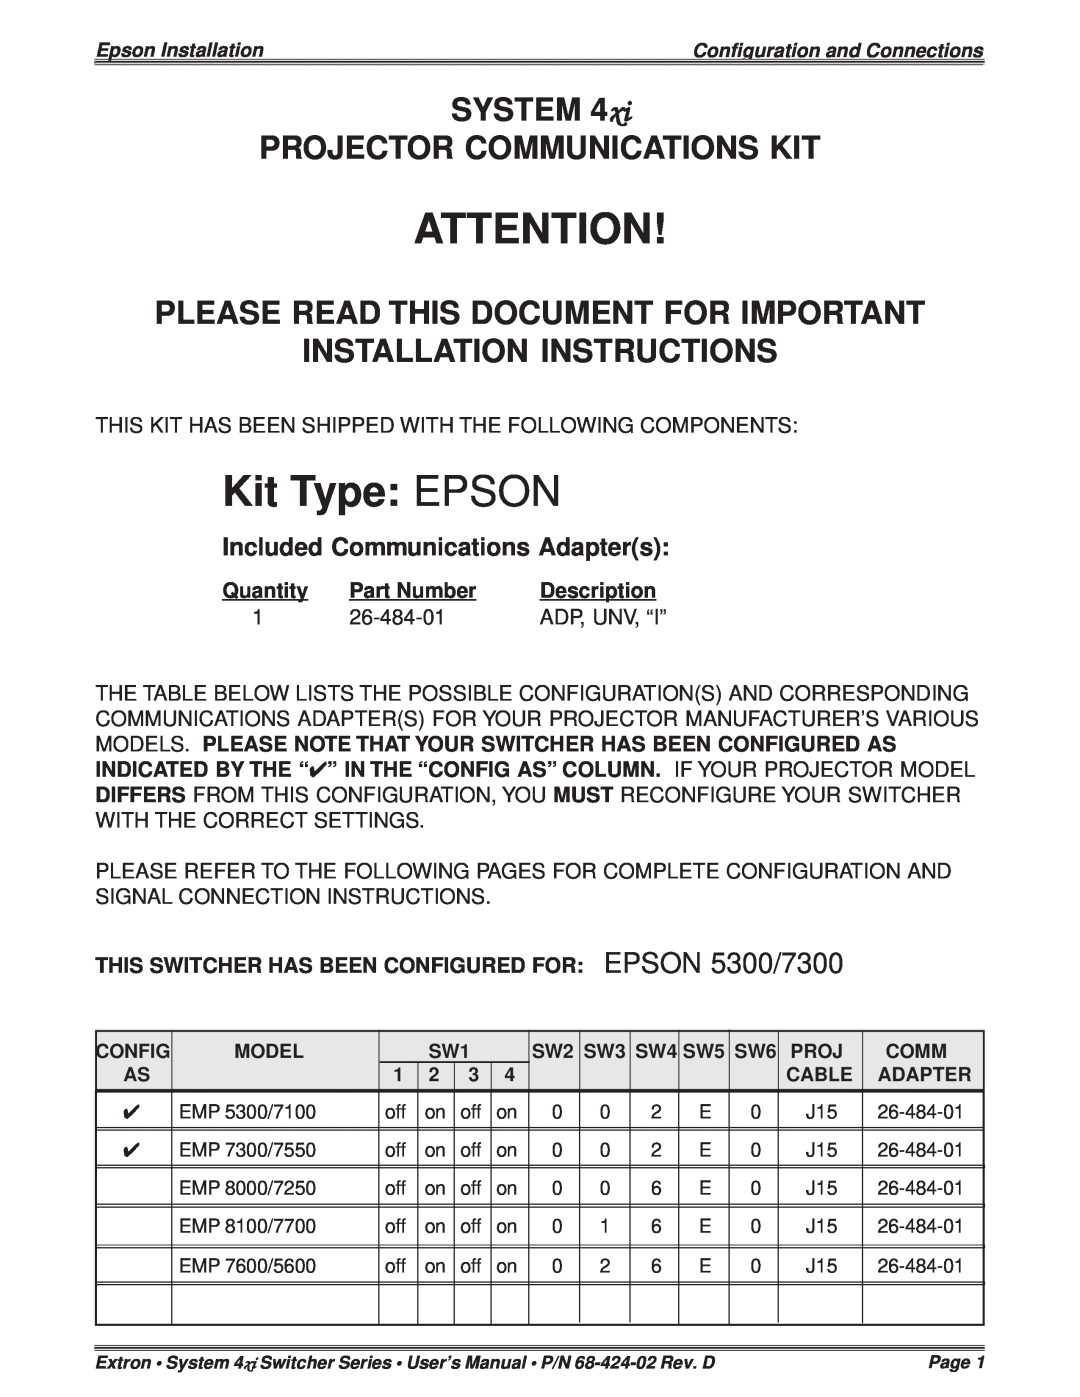 Extron electronic P/N 68-424-02 installation instructions Kit Type EPSON, System Projector Communications Kit, Quantity 